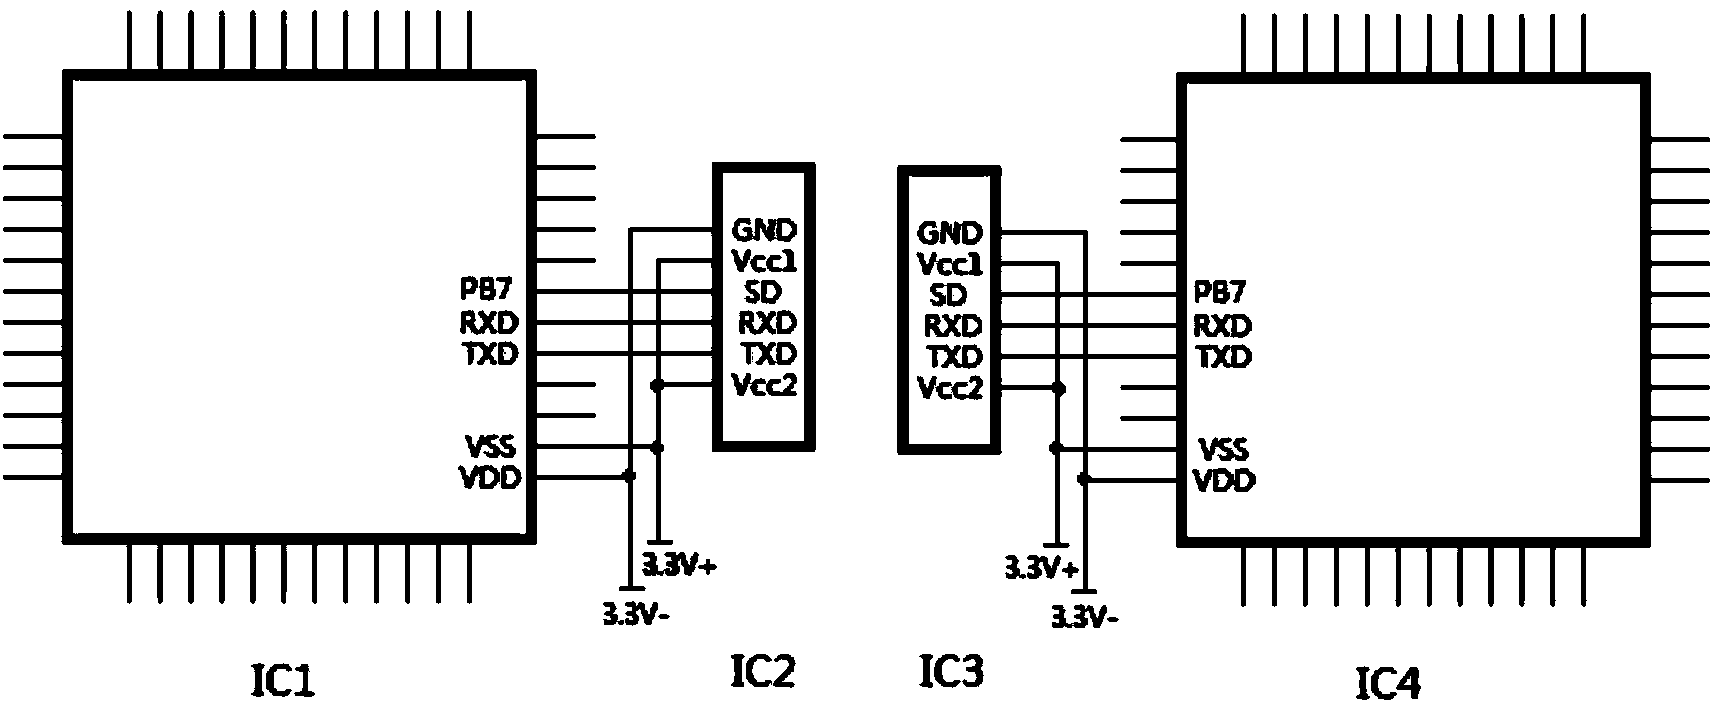 Optical communication circuit of functional modules and controllers in DCS (data transmission system) control system